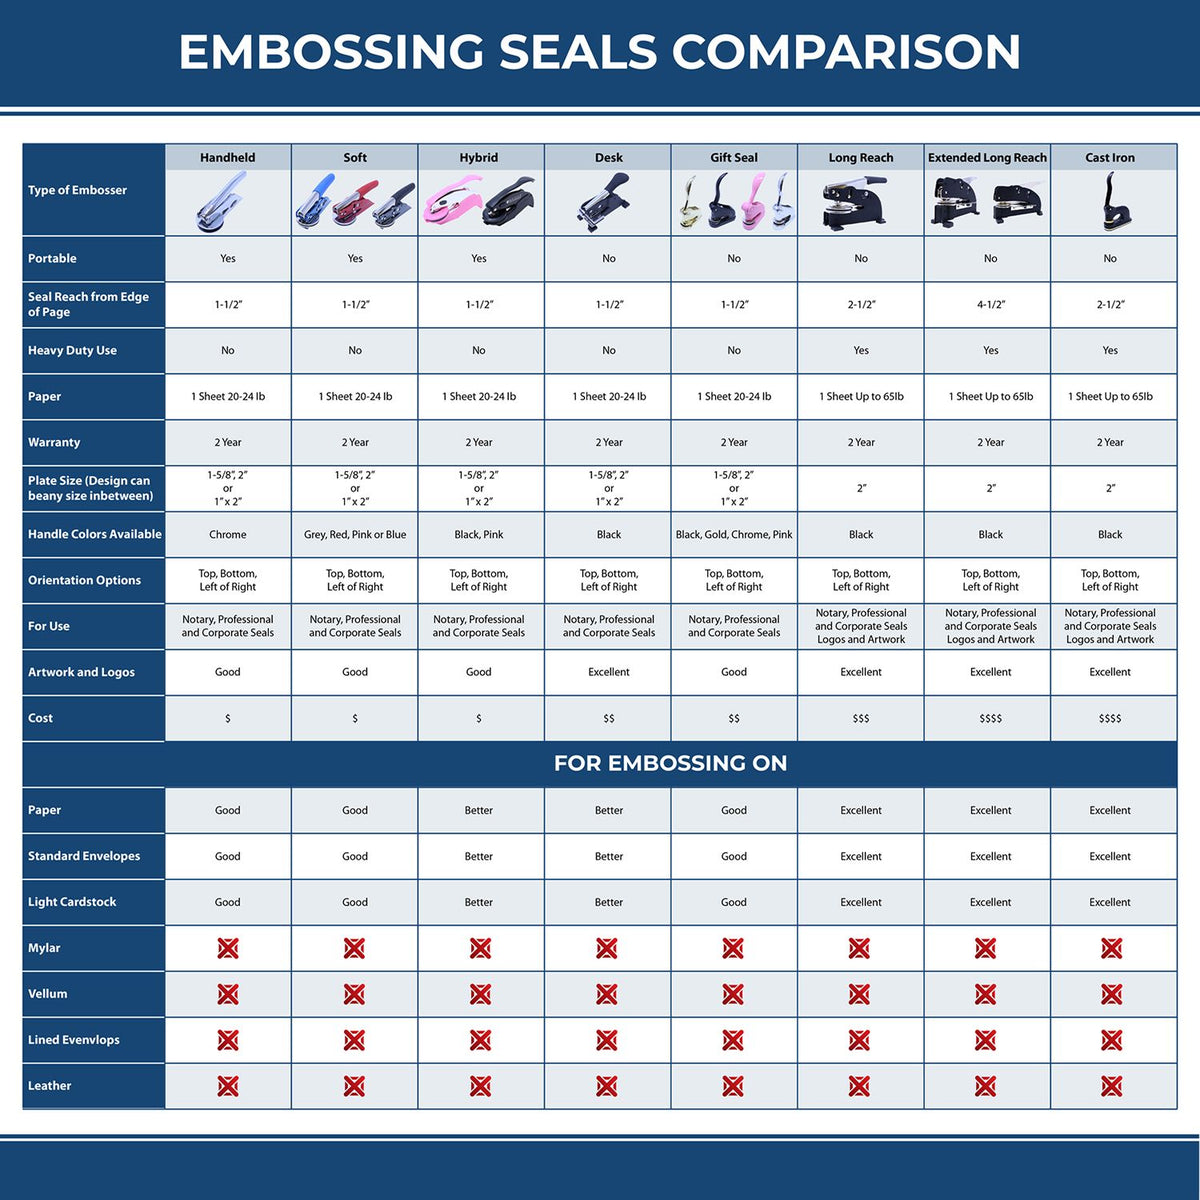 A comparison chart for the different types of mount models available for the Gift Delaware Land Surveyor Seal